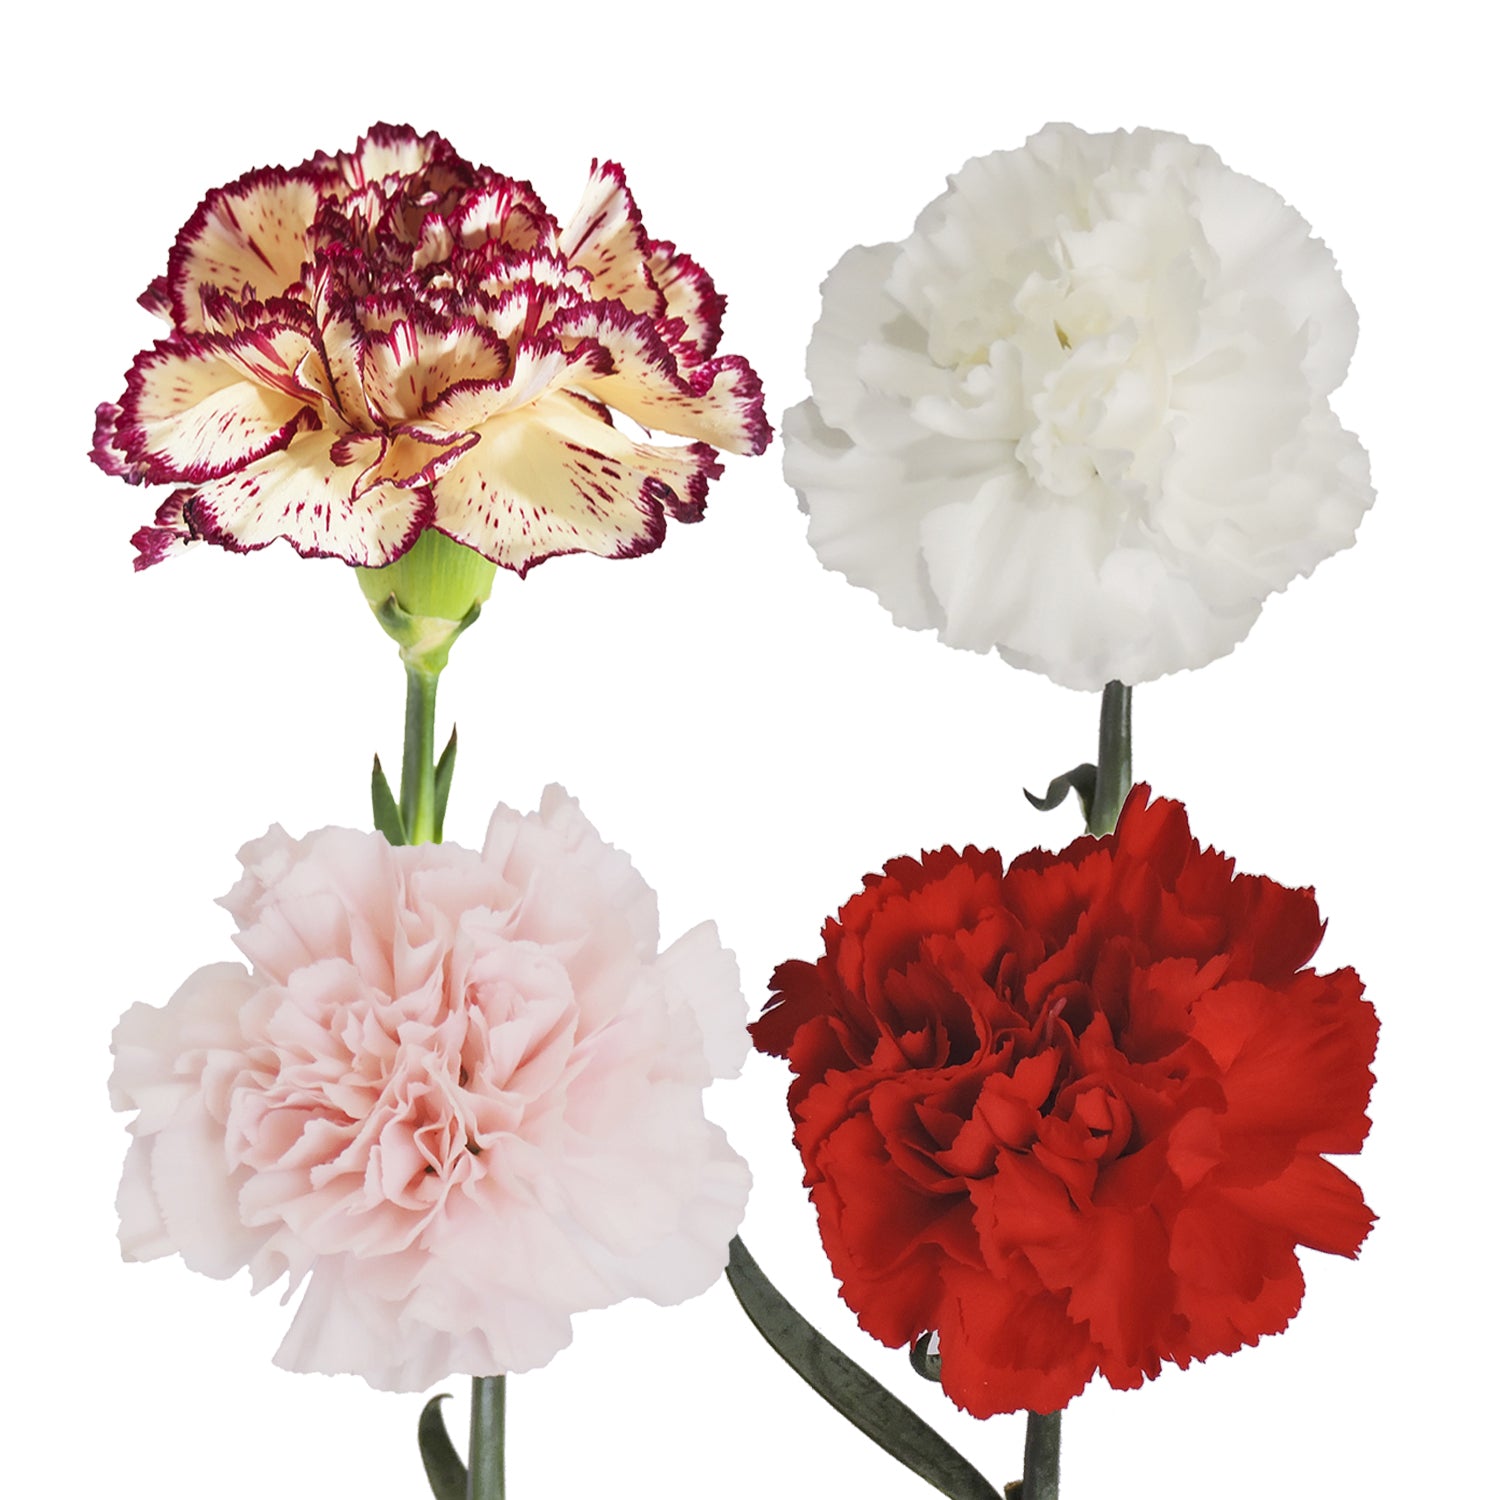 Mixed Color Novelty Carnation Flowers | DIY Wedding Flowers | FiftyFlowers